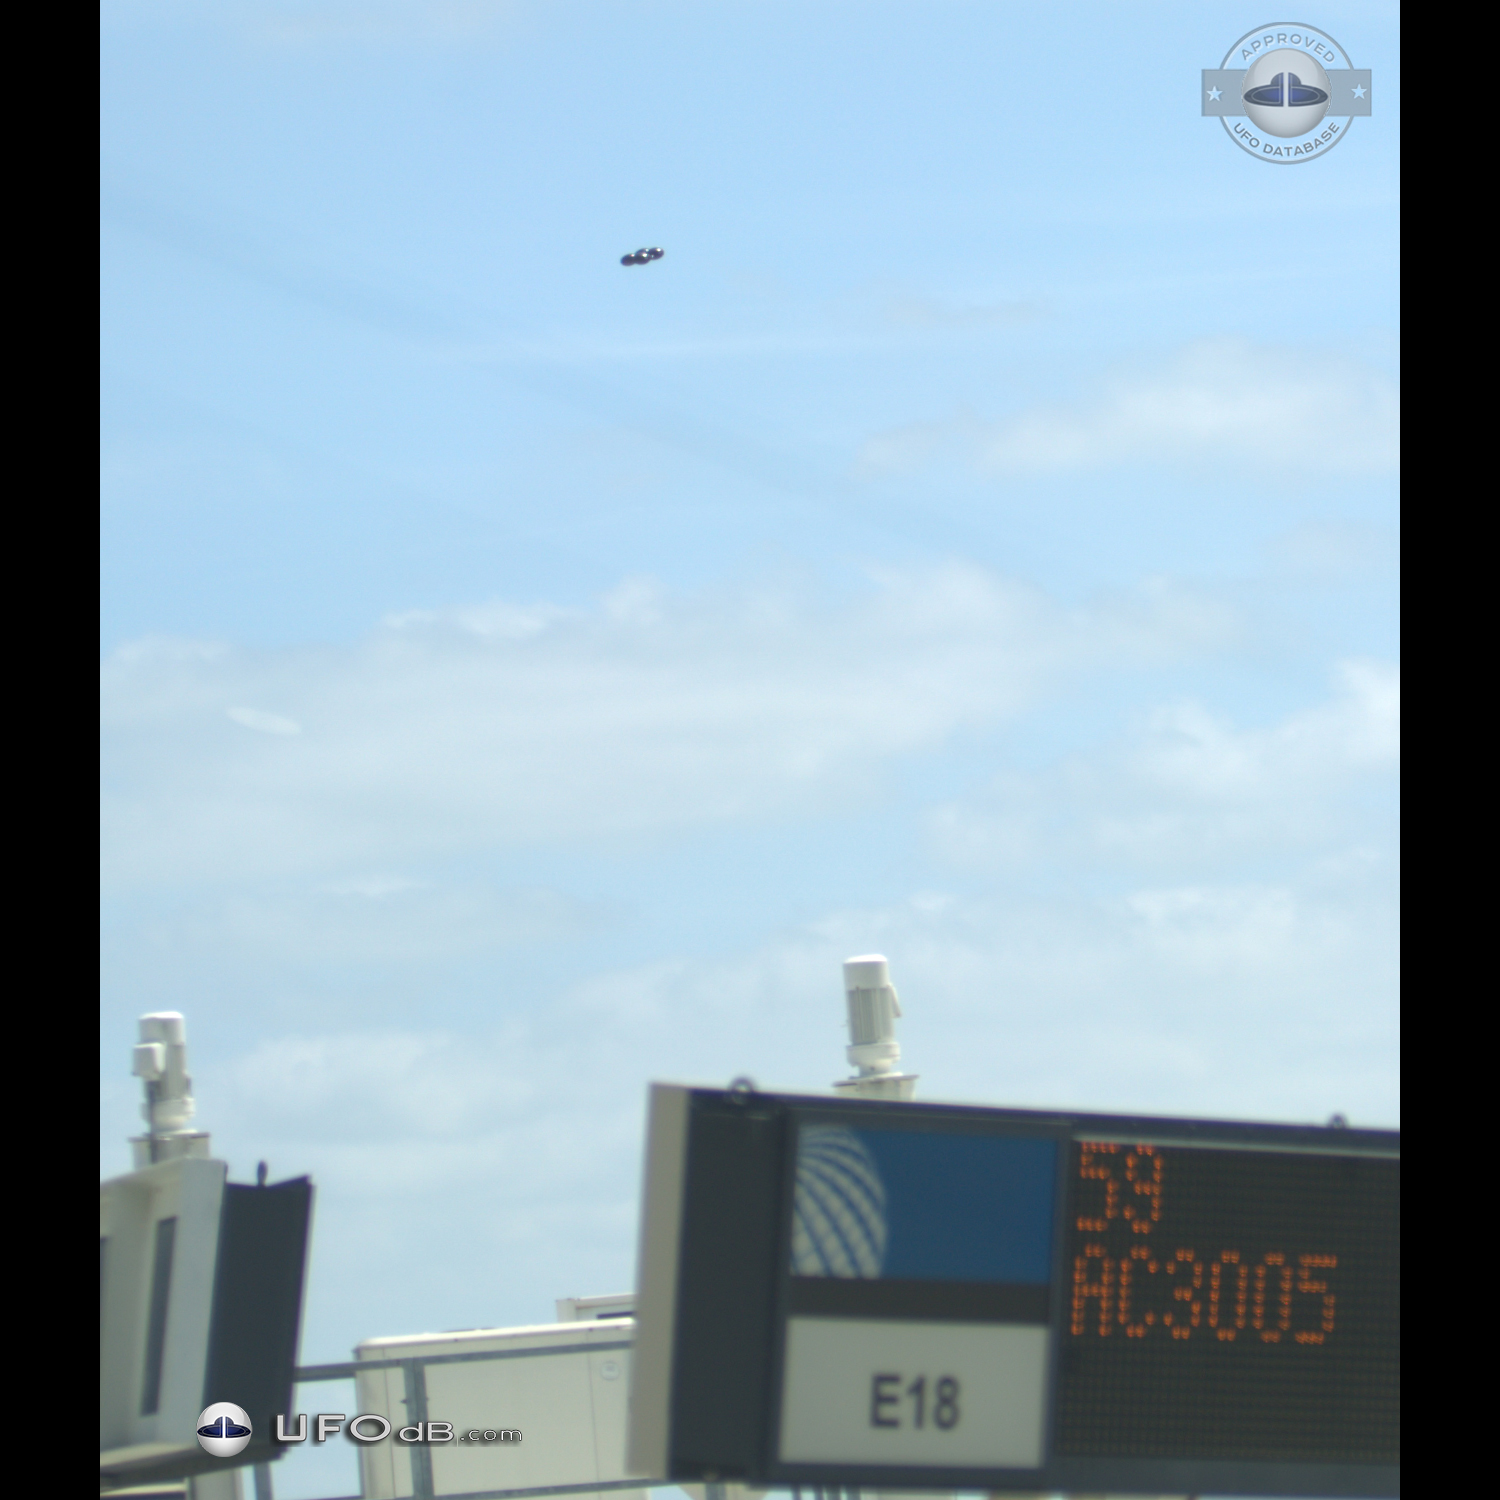 UFO with 4 Spheres over Austin Bergstrom Airport in Texas USA 2014 UFO Picture #670-4